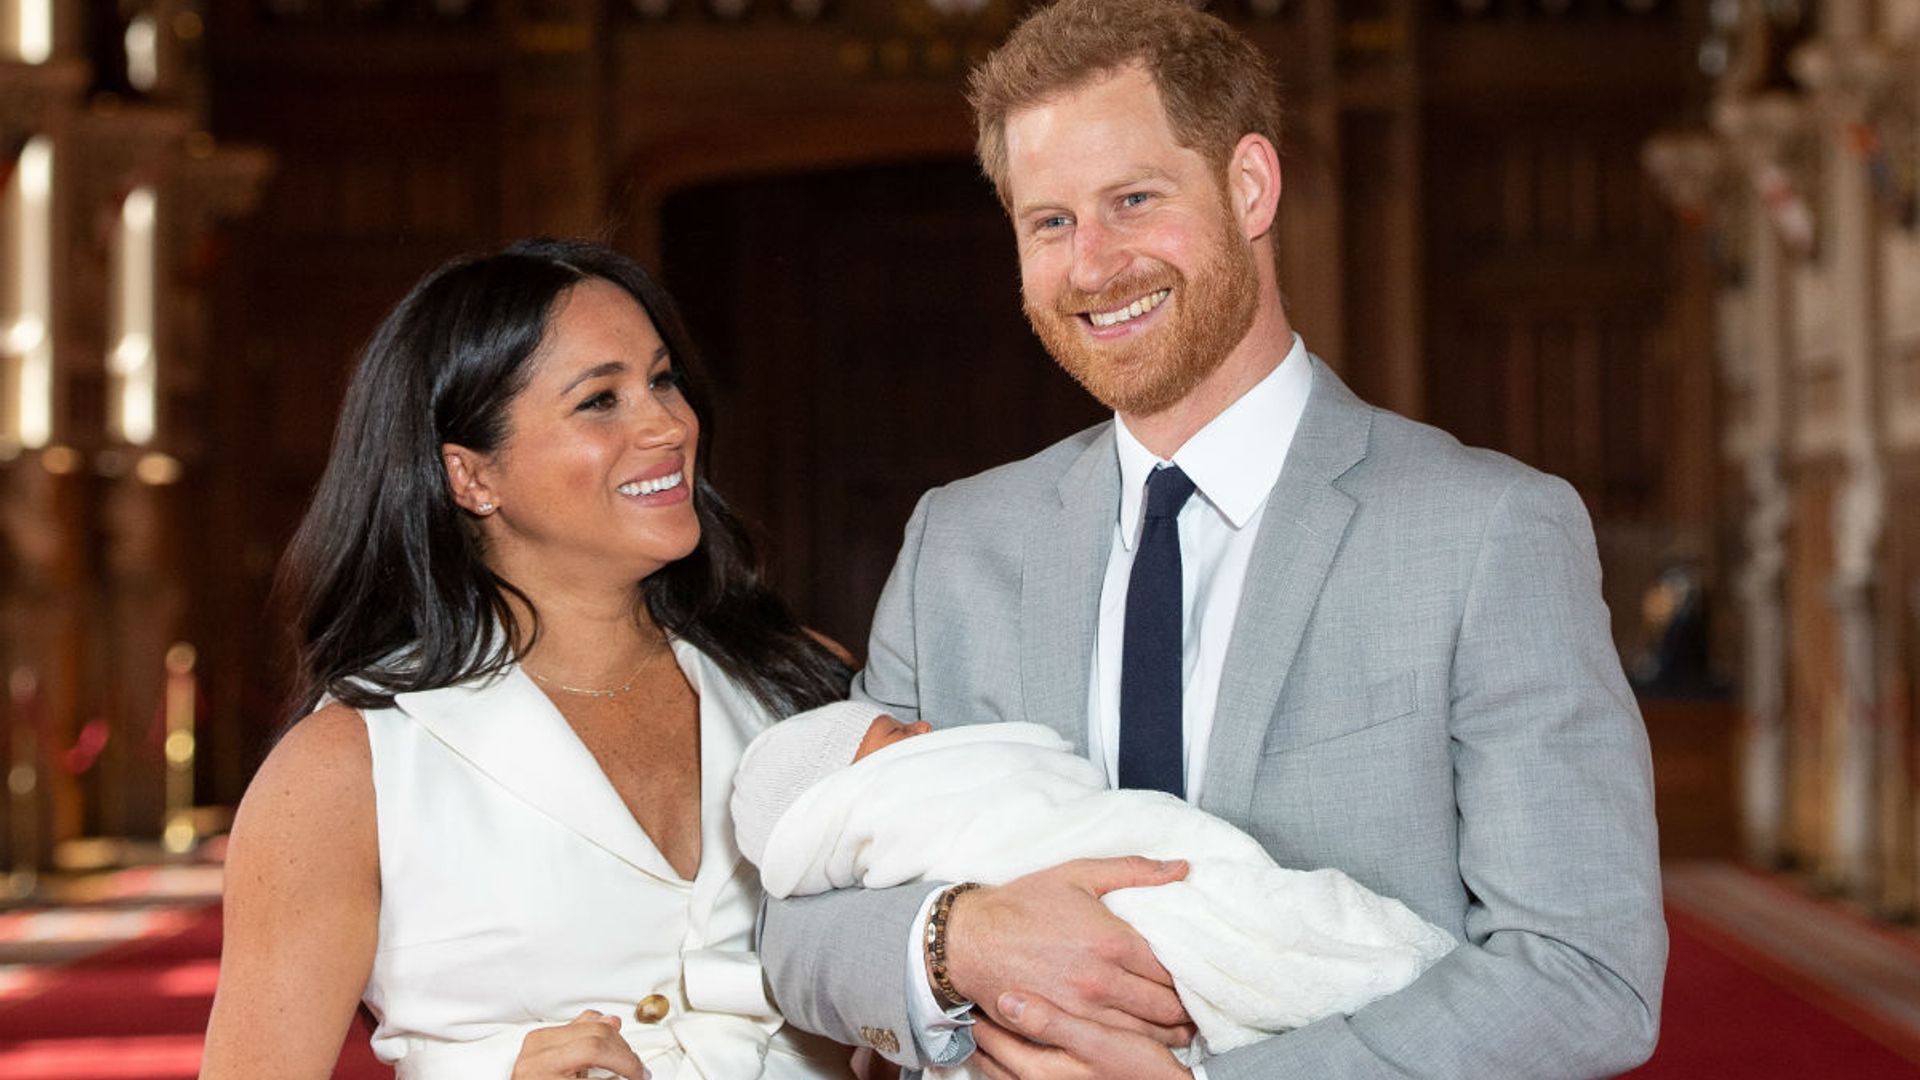 How we could be seeing a new baby Archie photo as Meghan Markle celebrates first Mother's Day